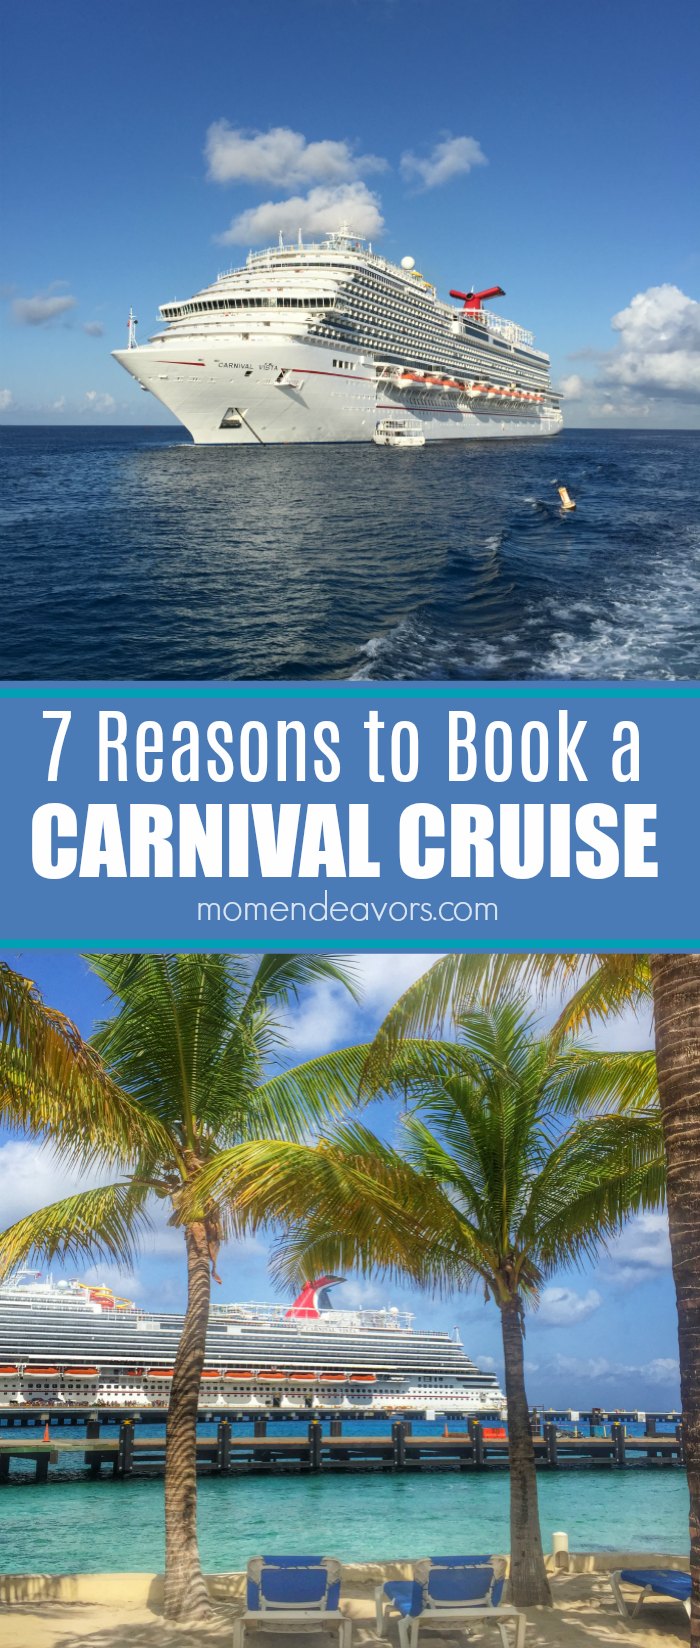 Why Book a Carnival Cruise